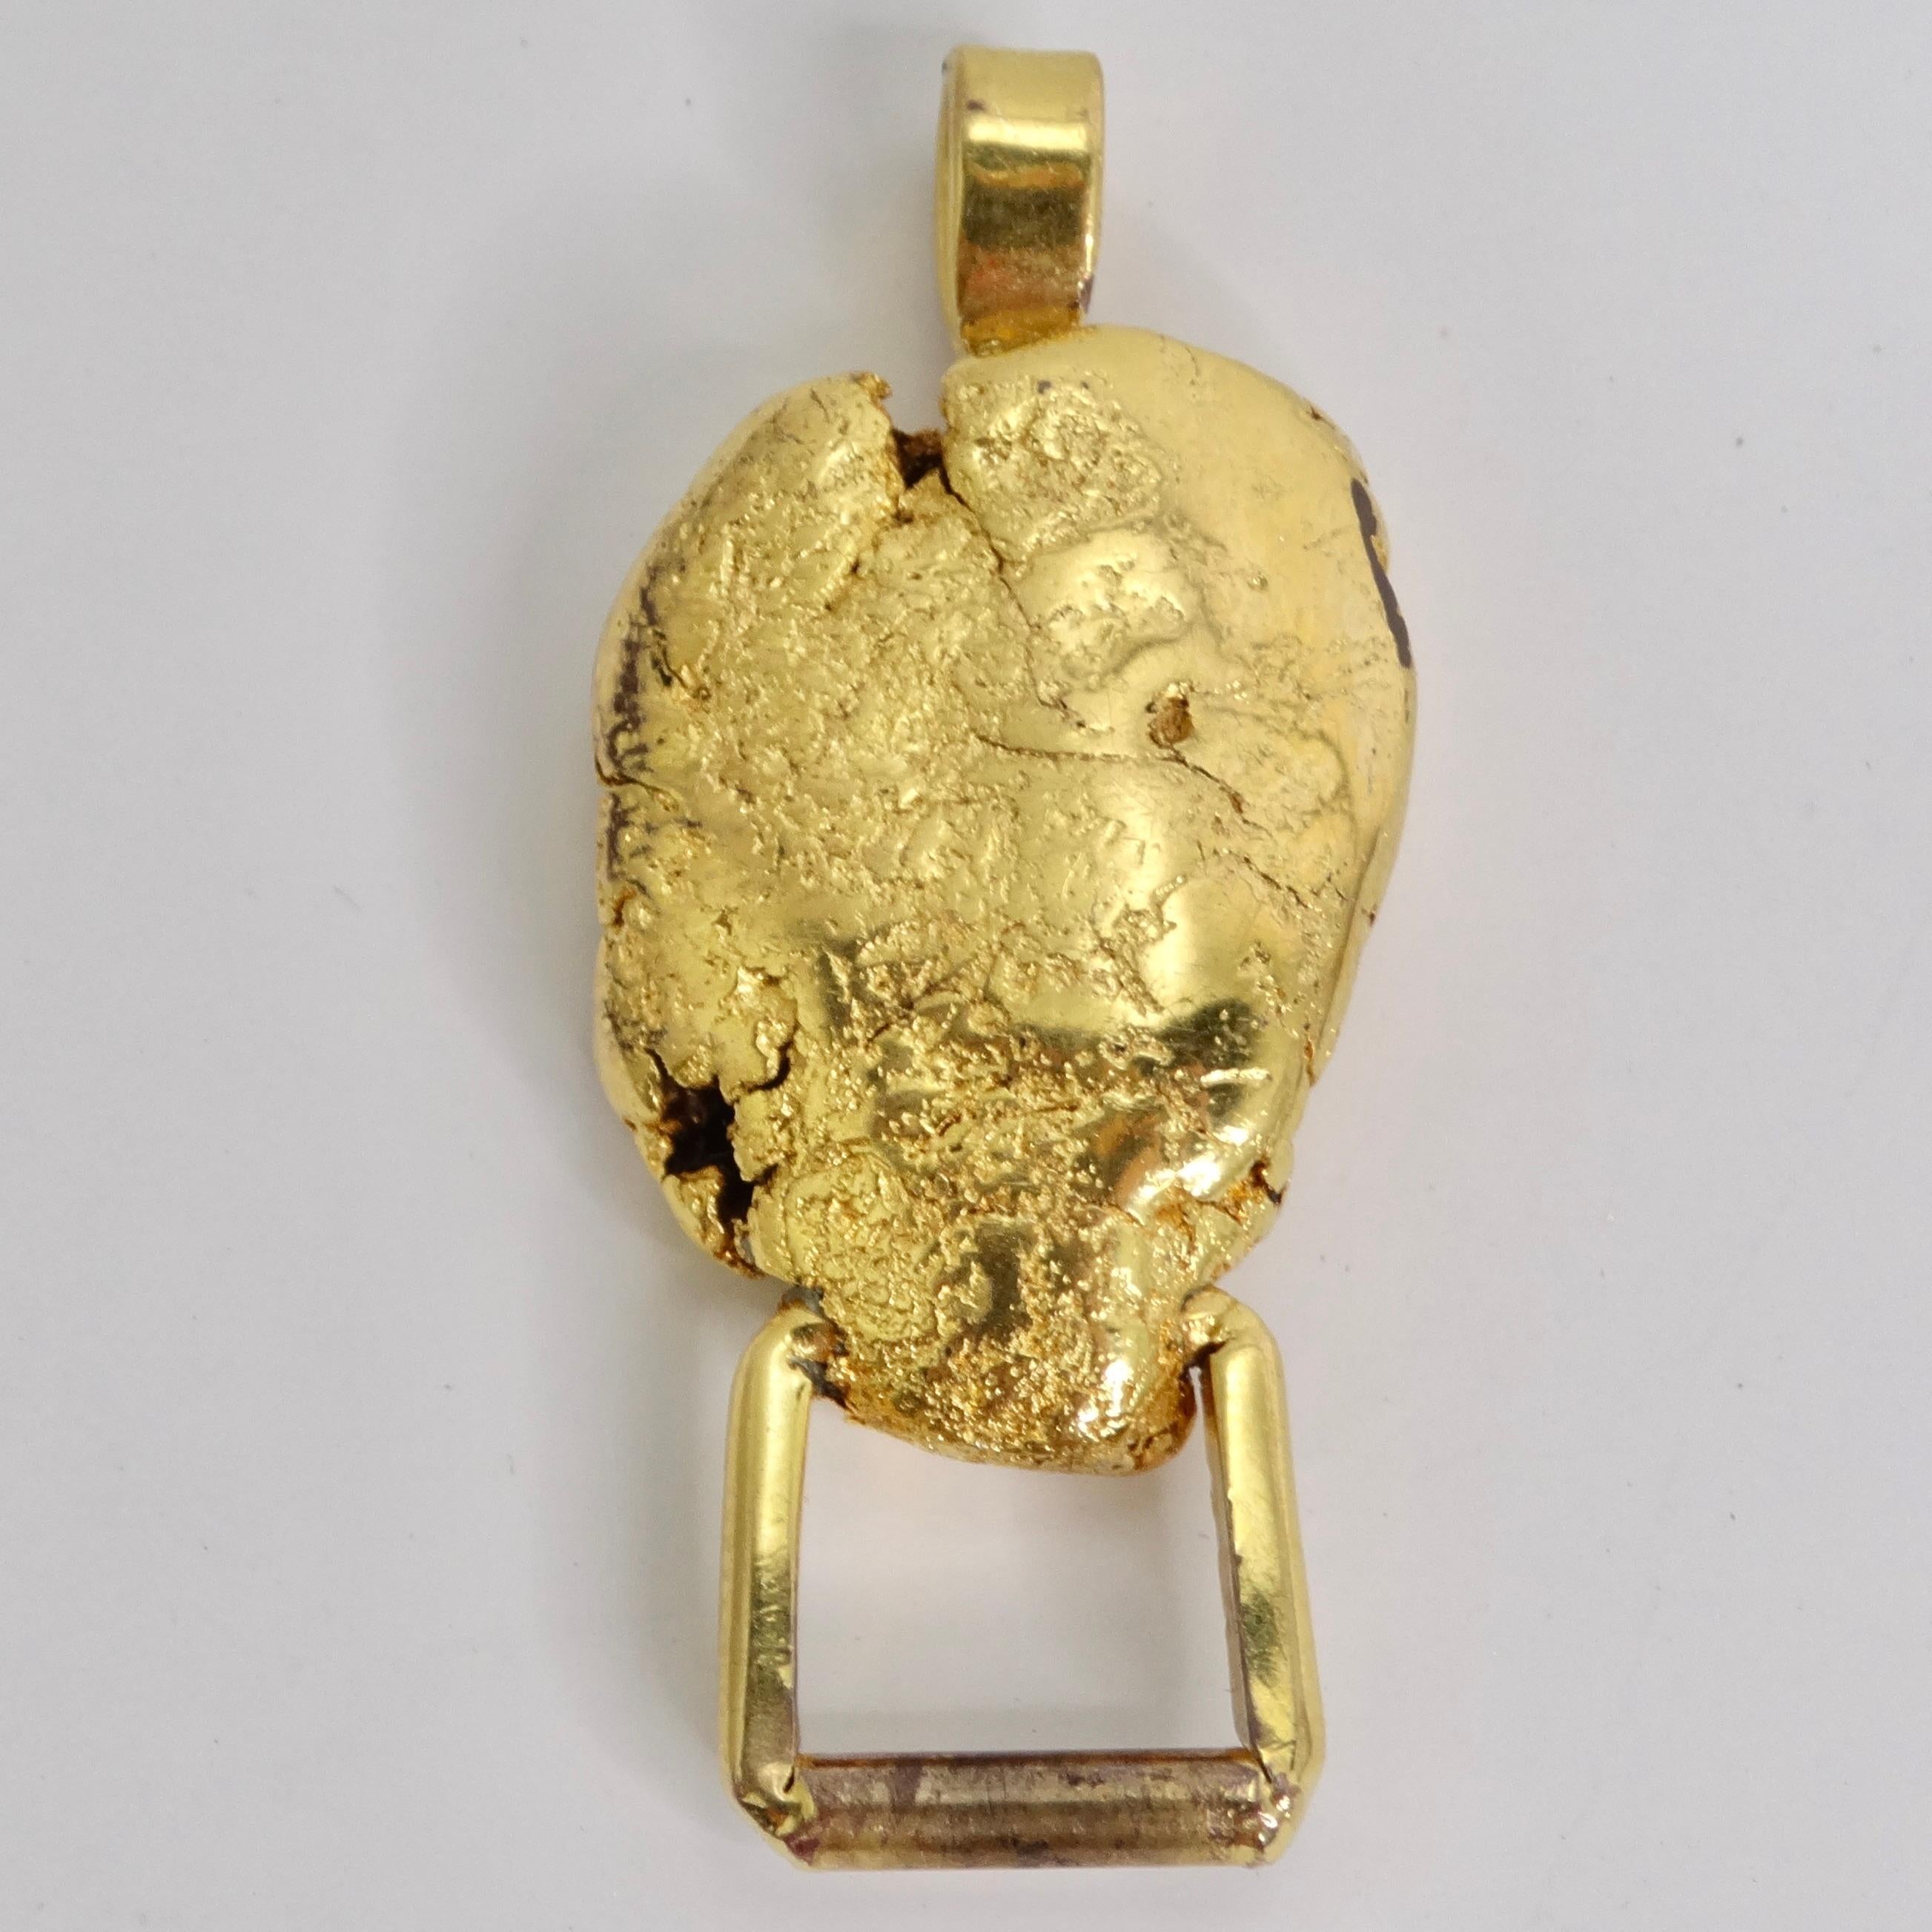 24K Gold Plated Nugget Pendent Circa 1980s In Excellent Condition For Sale In Scottsdale, AZ